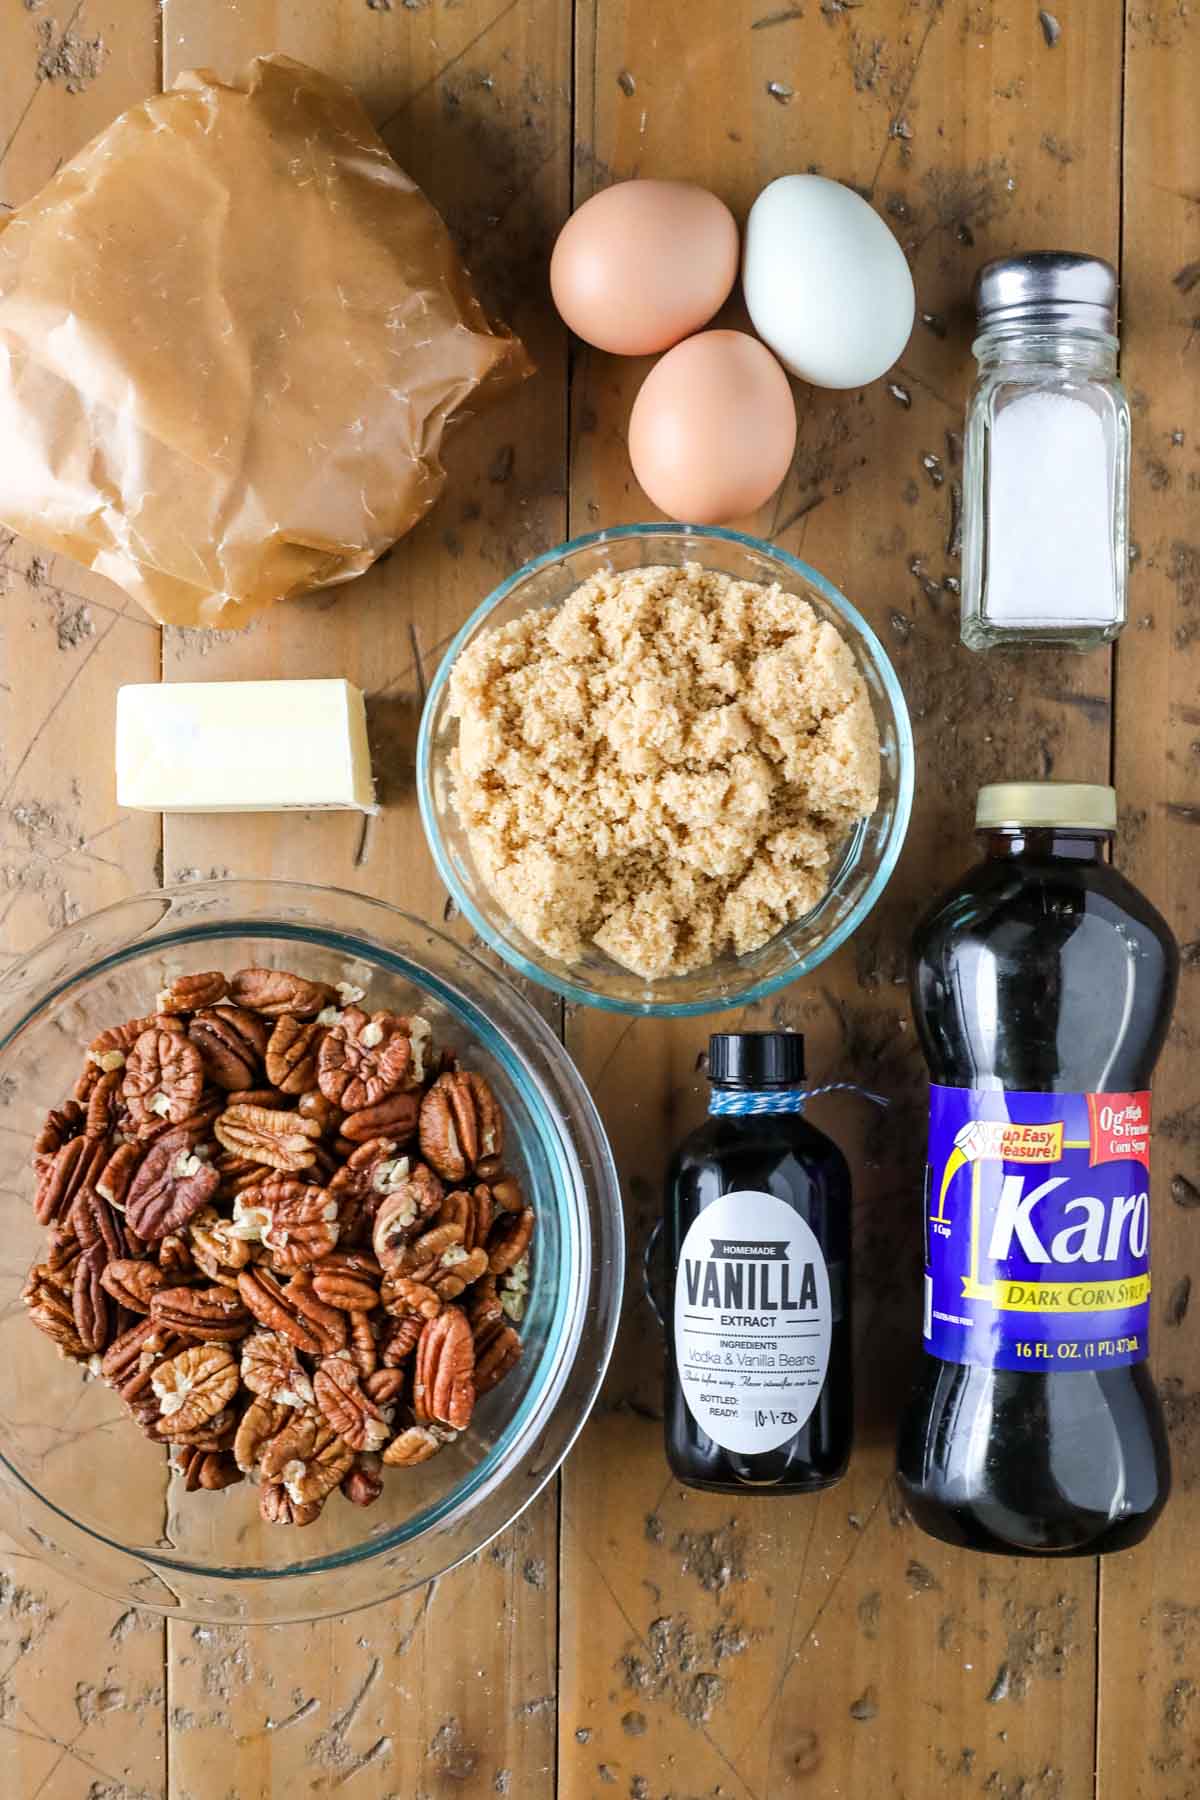 Overhead view of ingredients including pecans, pie dough, brown sugar, dark corn syrup, and more.